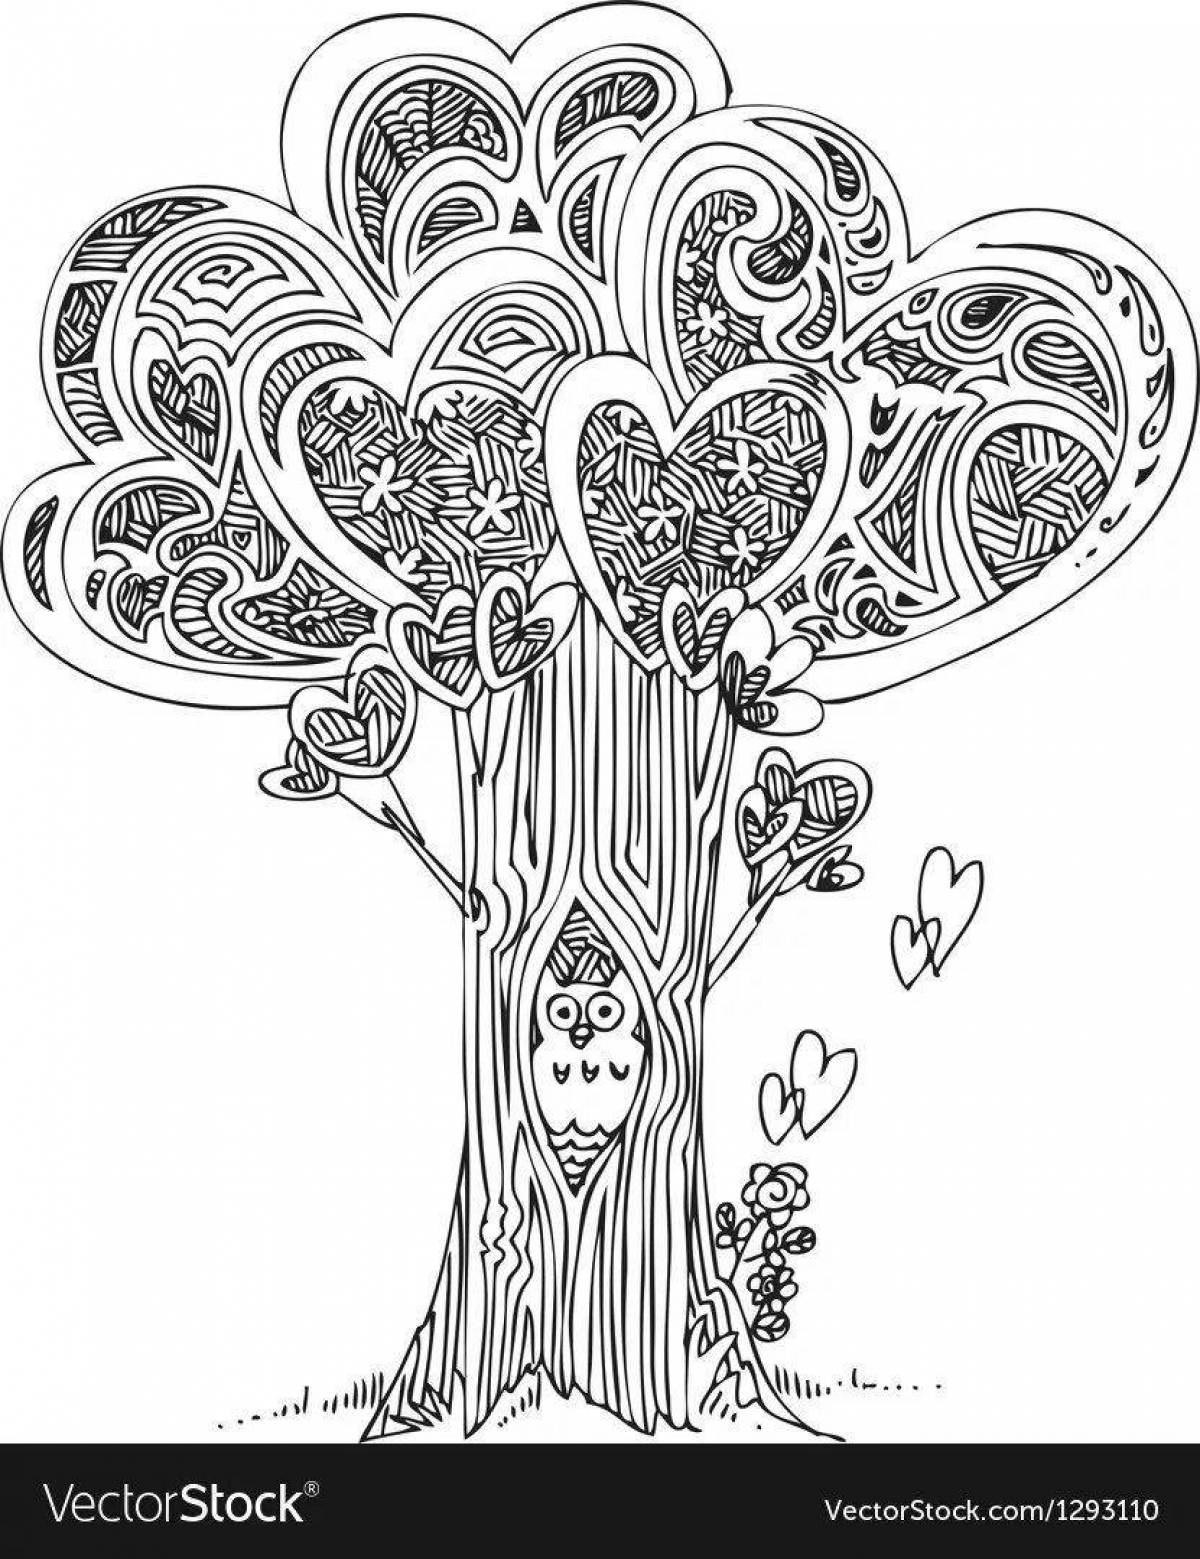 Dazzling fairy tree coloring book